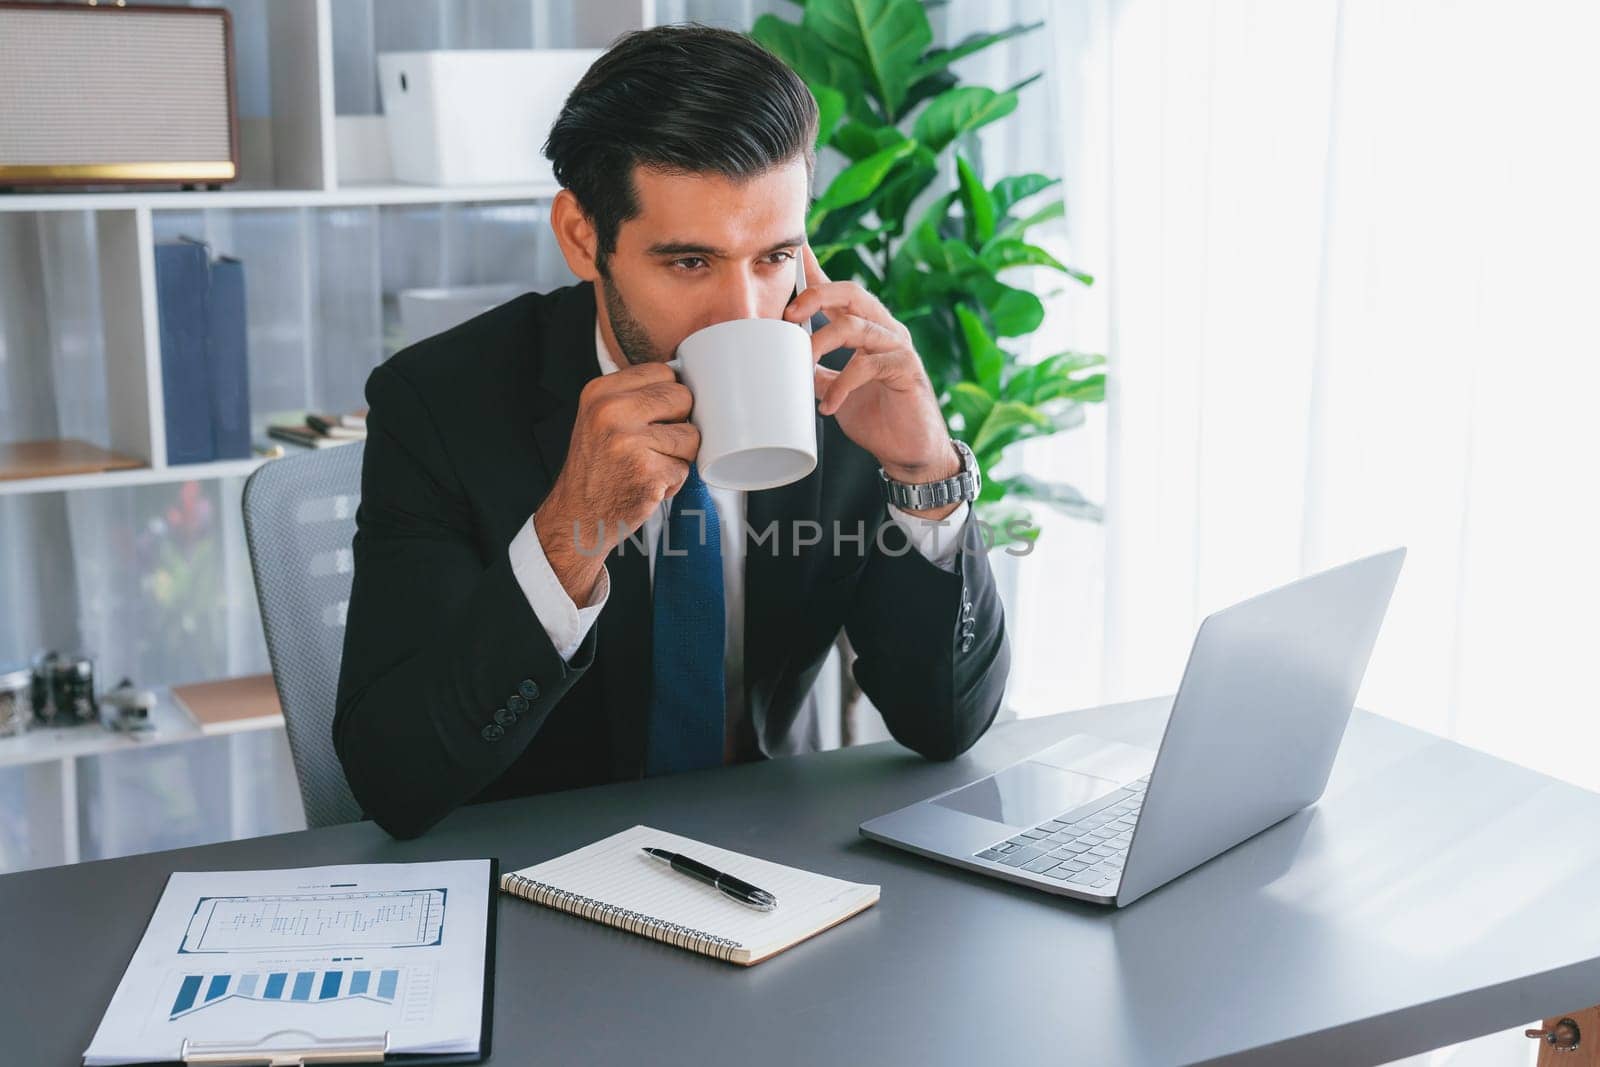 Businessman working in modern office workspace with cup of coffee in his hand while answering phone call making sales calls or managing employee. Fervent